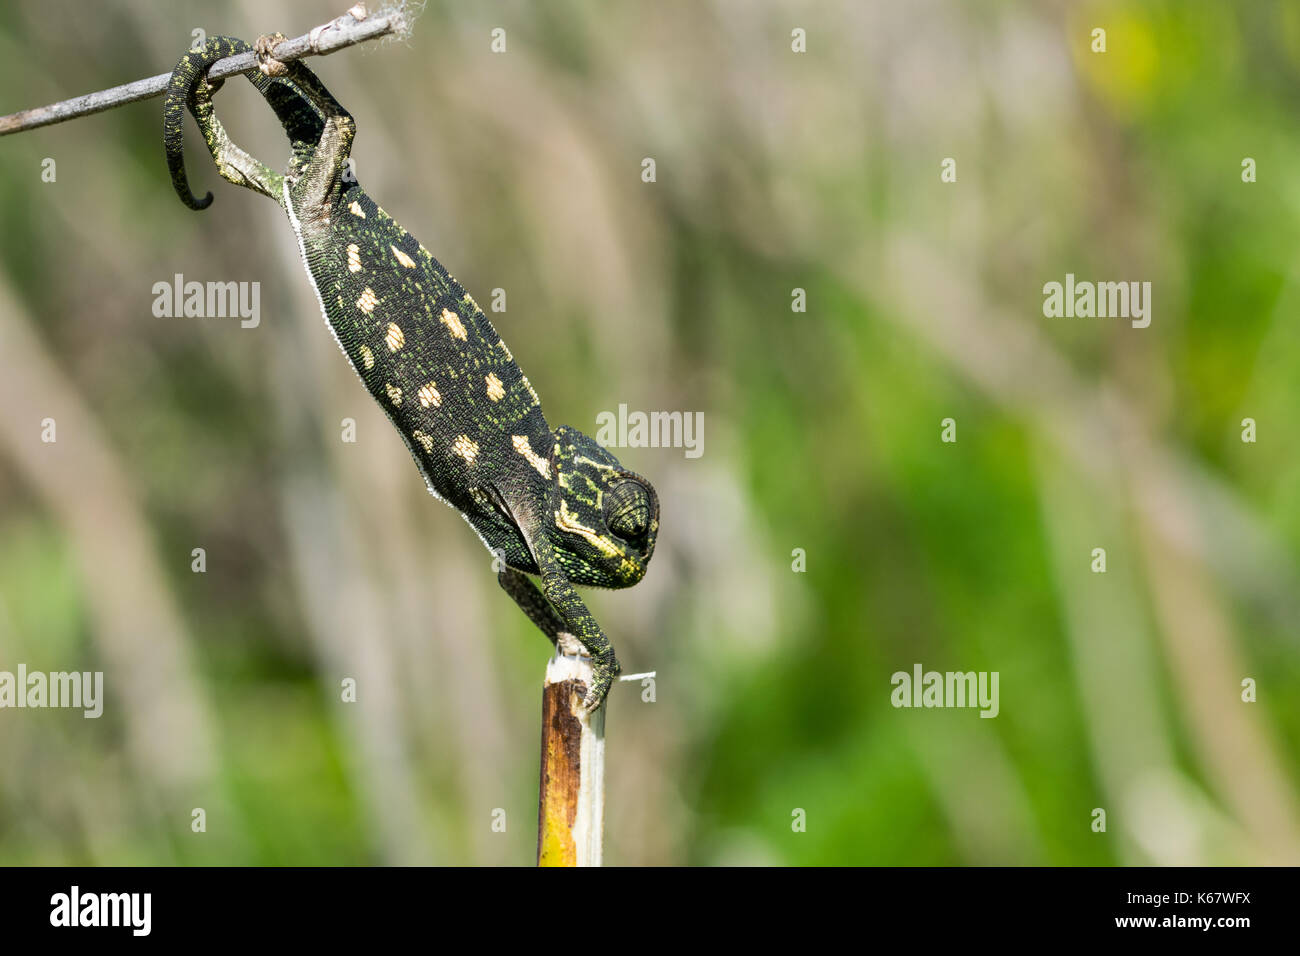 A baby chameleon in camouflage stretching to hold on to a fennel twig. Malta Stock Photo